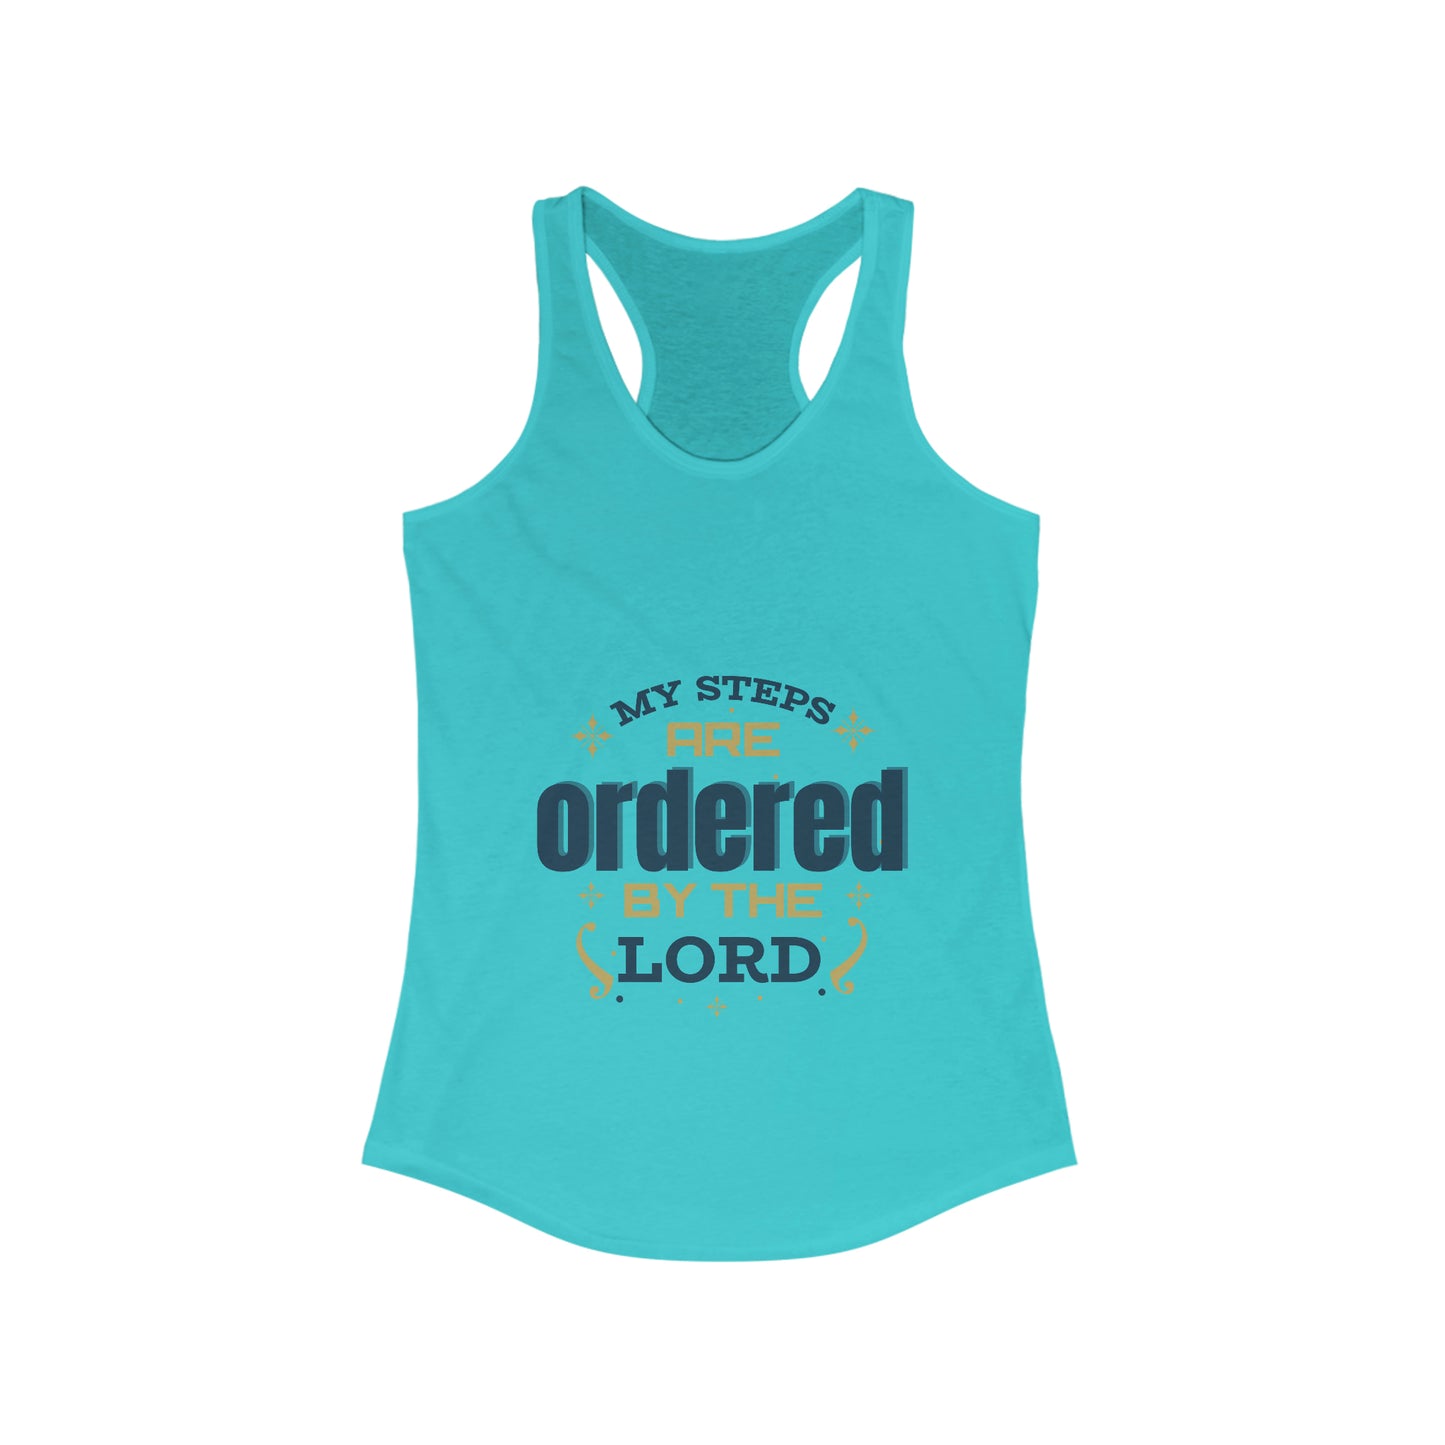 My Steps Are Ordered By The Lord  Slim Fit Tank-top